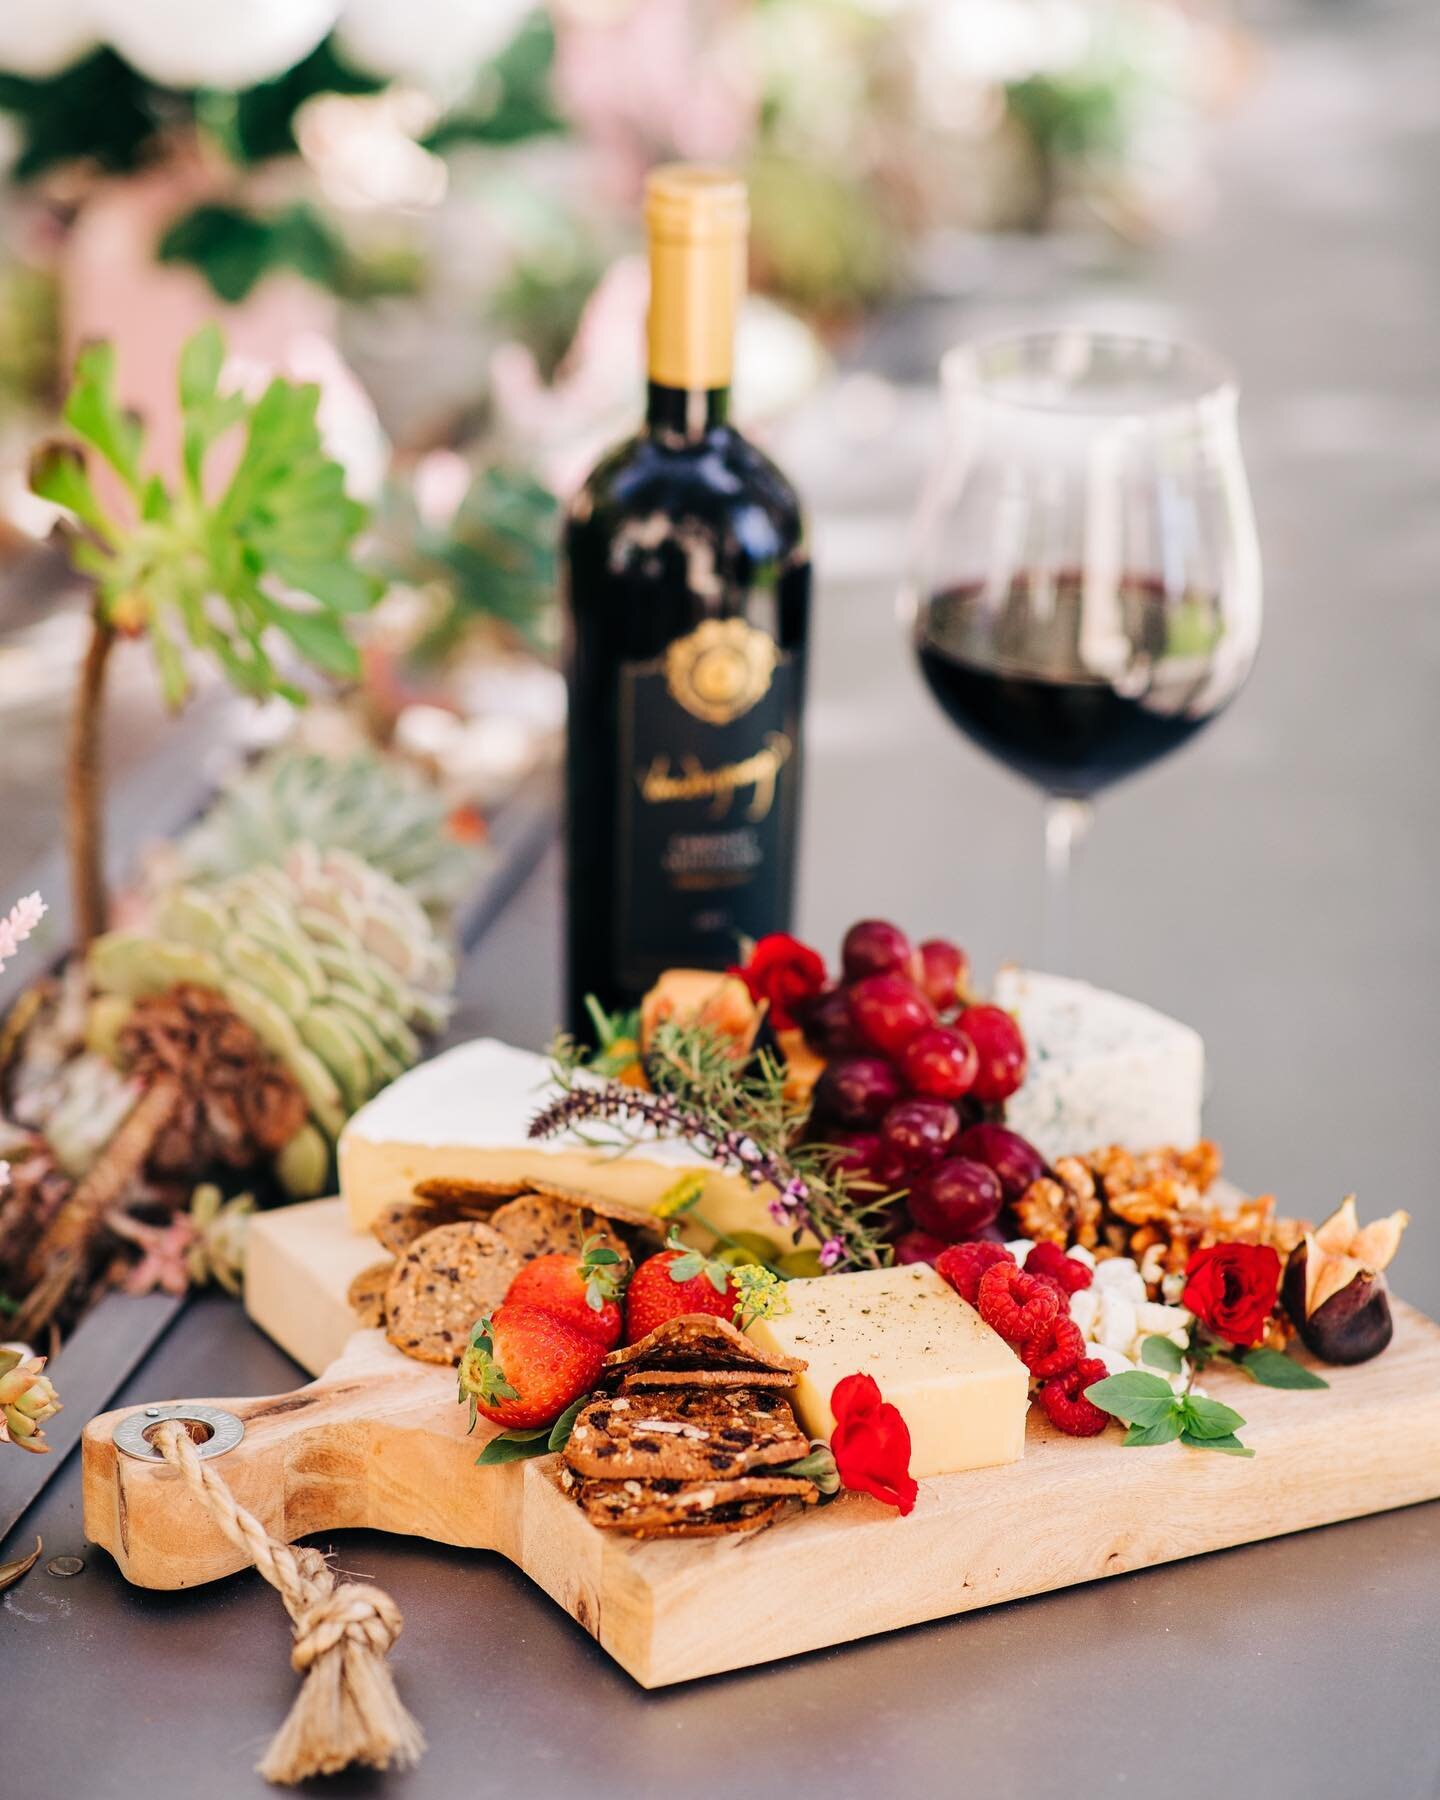 Love creating sumptuous cheese boards to pair with our delicious @vanderpumpwines Cabernet! 😍 Have you guys checked out @veryvanderpump for some of my and @lisavanderpump &lsquo;s recipes yet? 📸 by @betsnewman